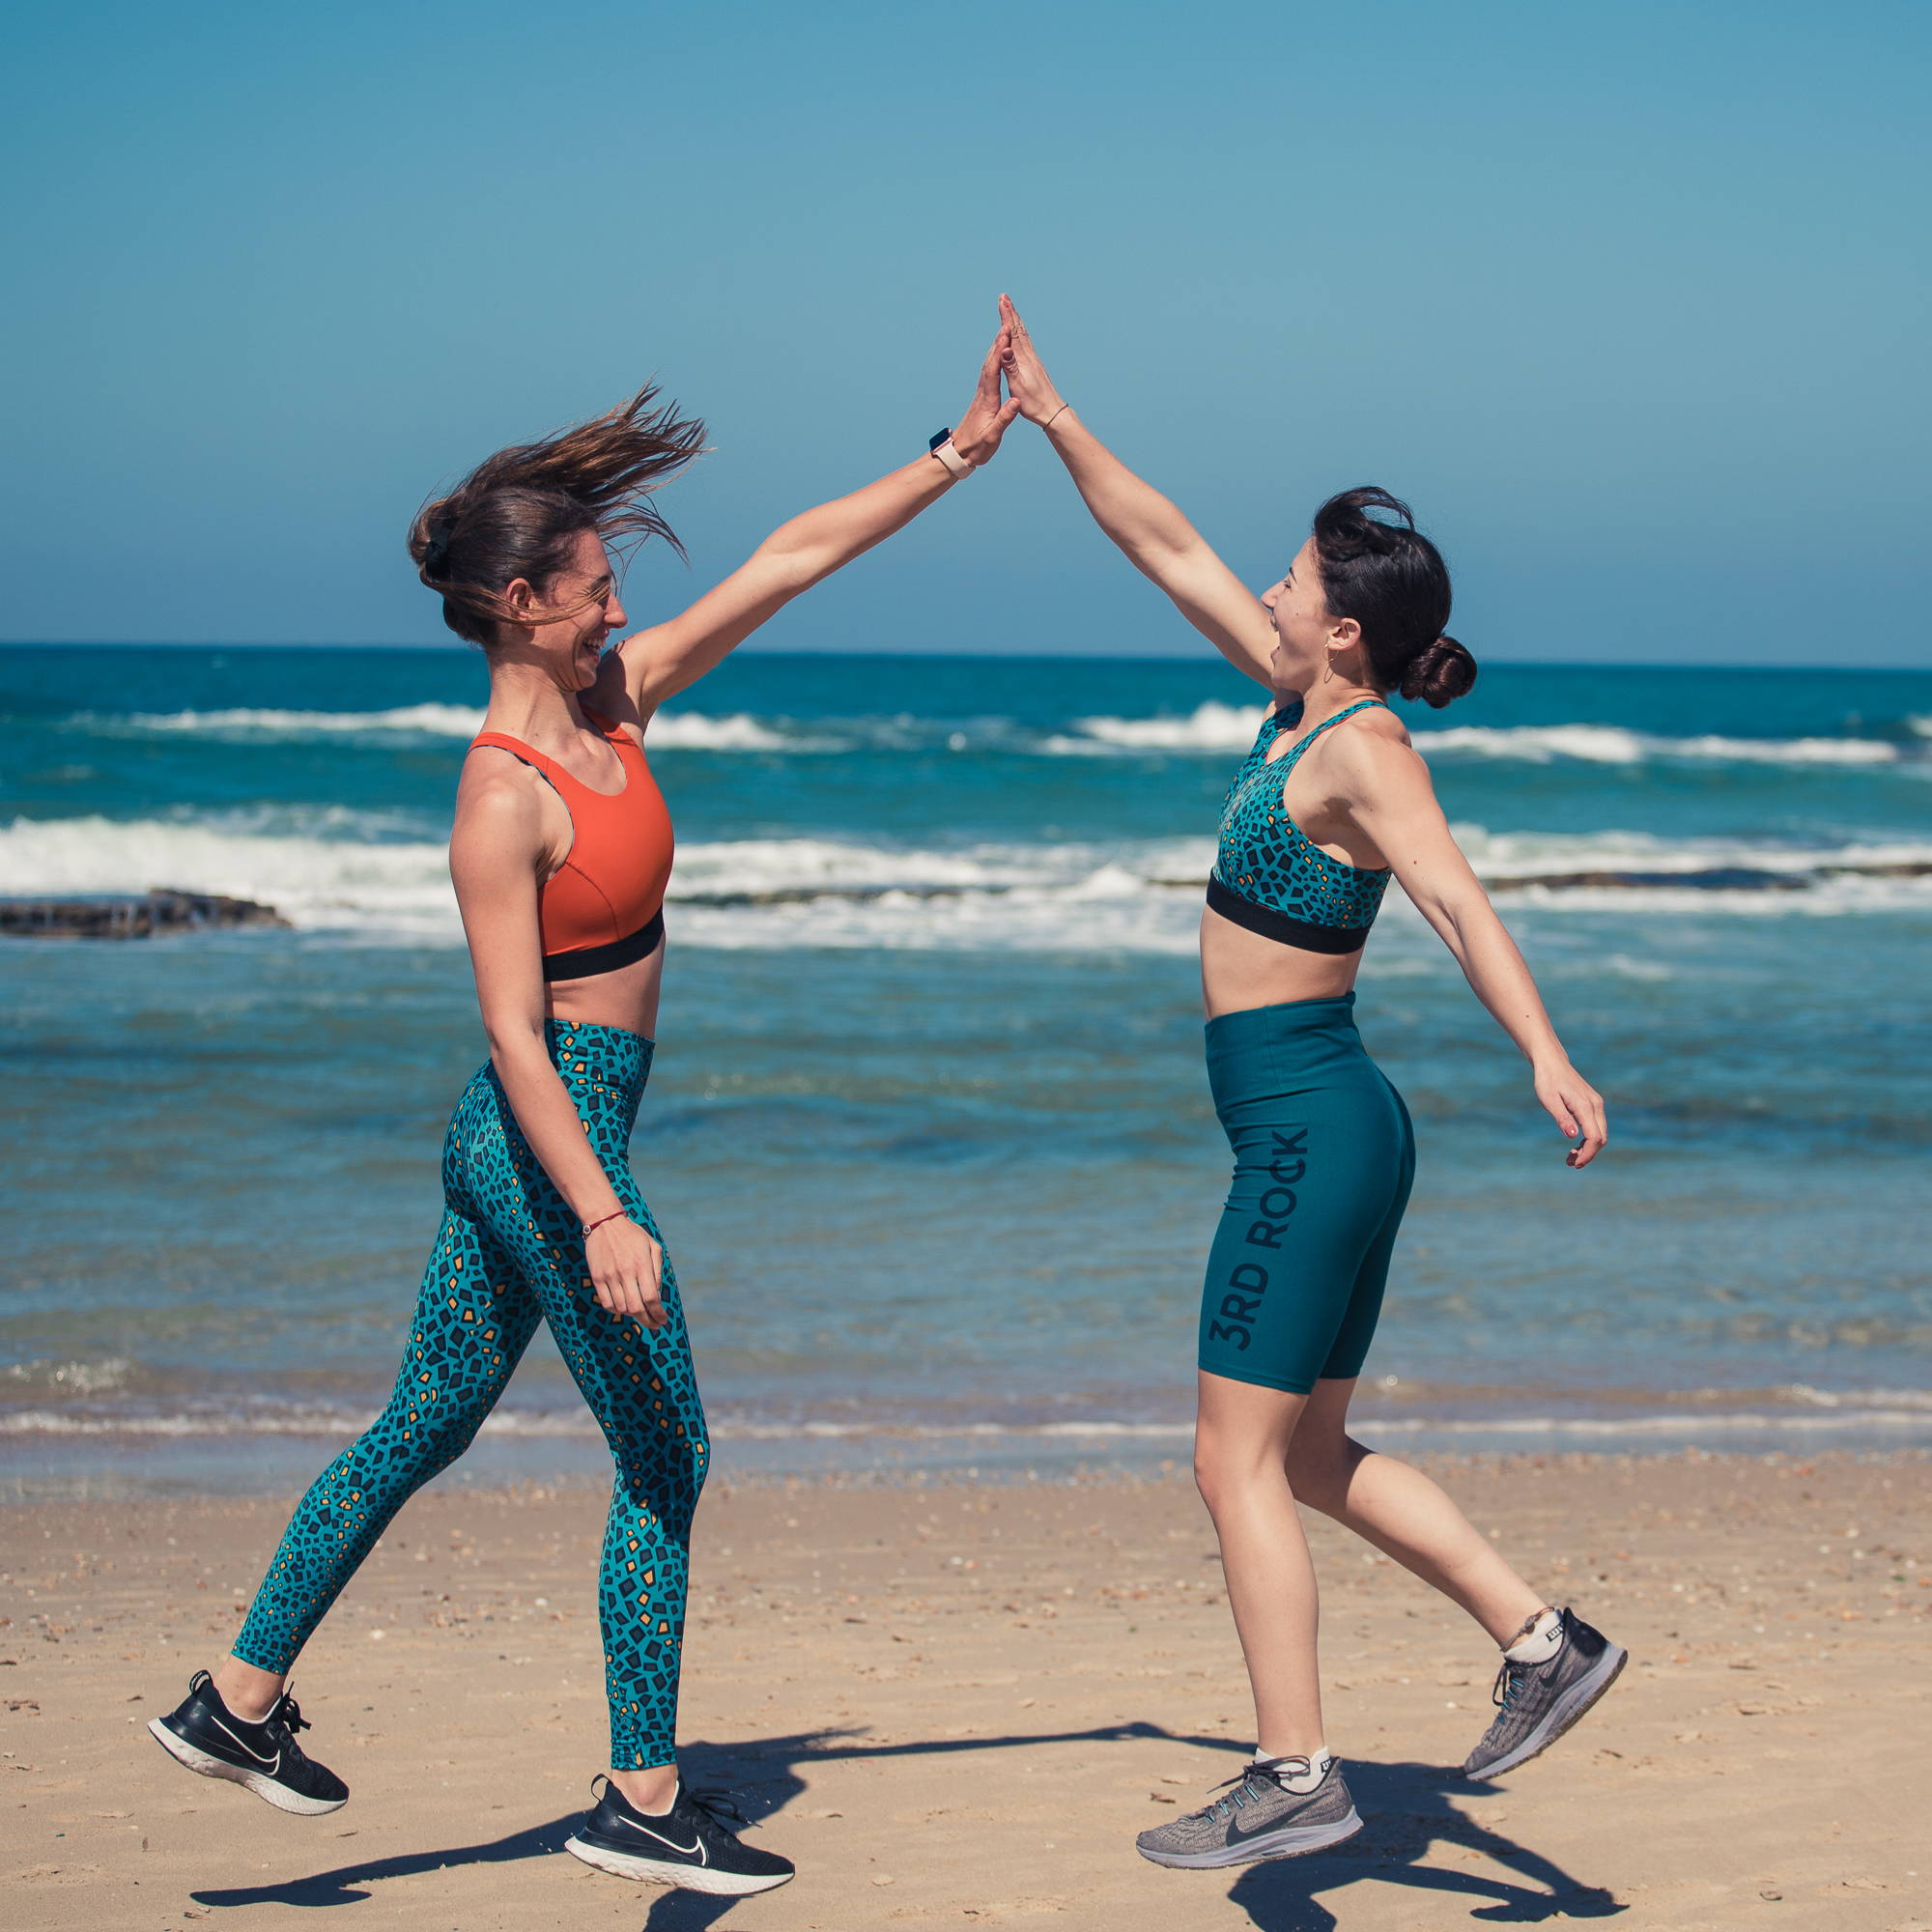 A shot from one of our Summer shoots on the beach. This photo features two of our models sharing a solid high five with the ocean in the background.